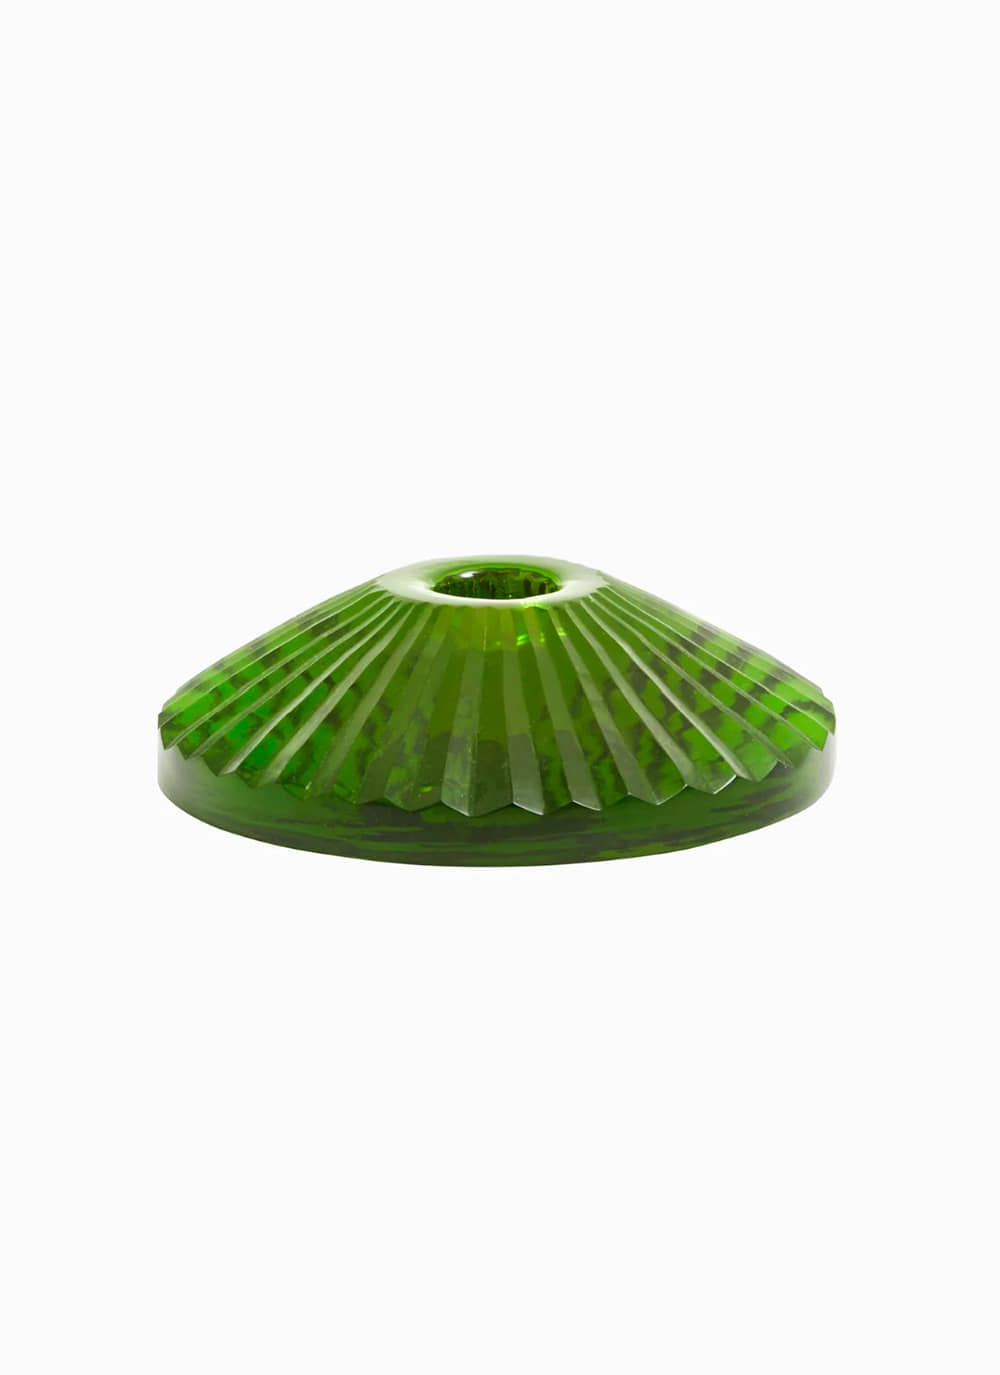 CANDLE HOLDER - APPLE GREEN, GLASS